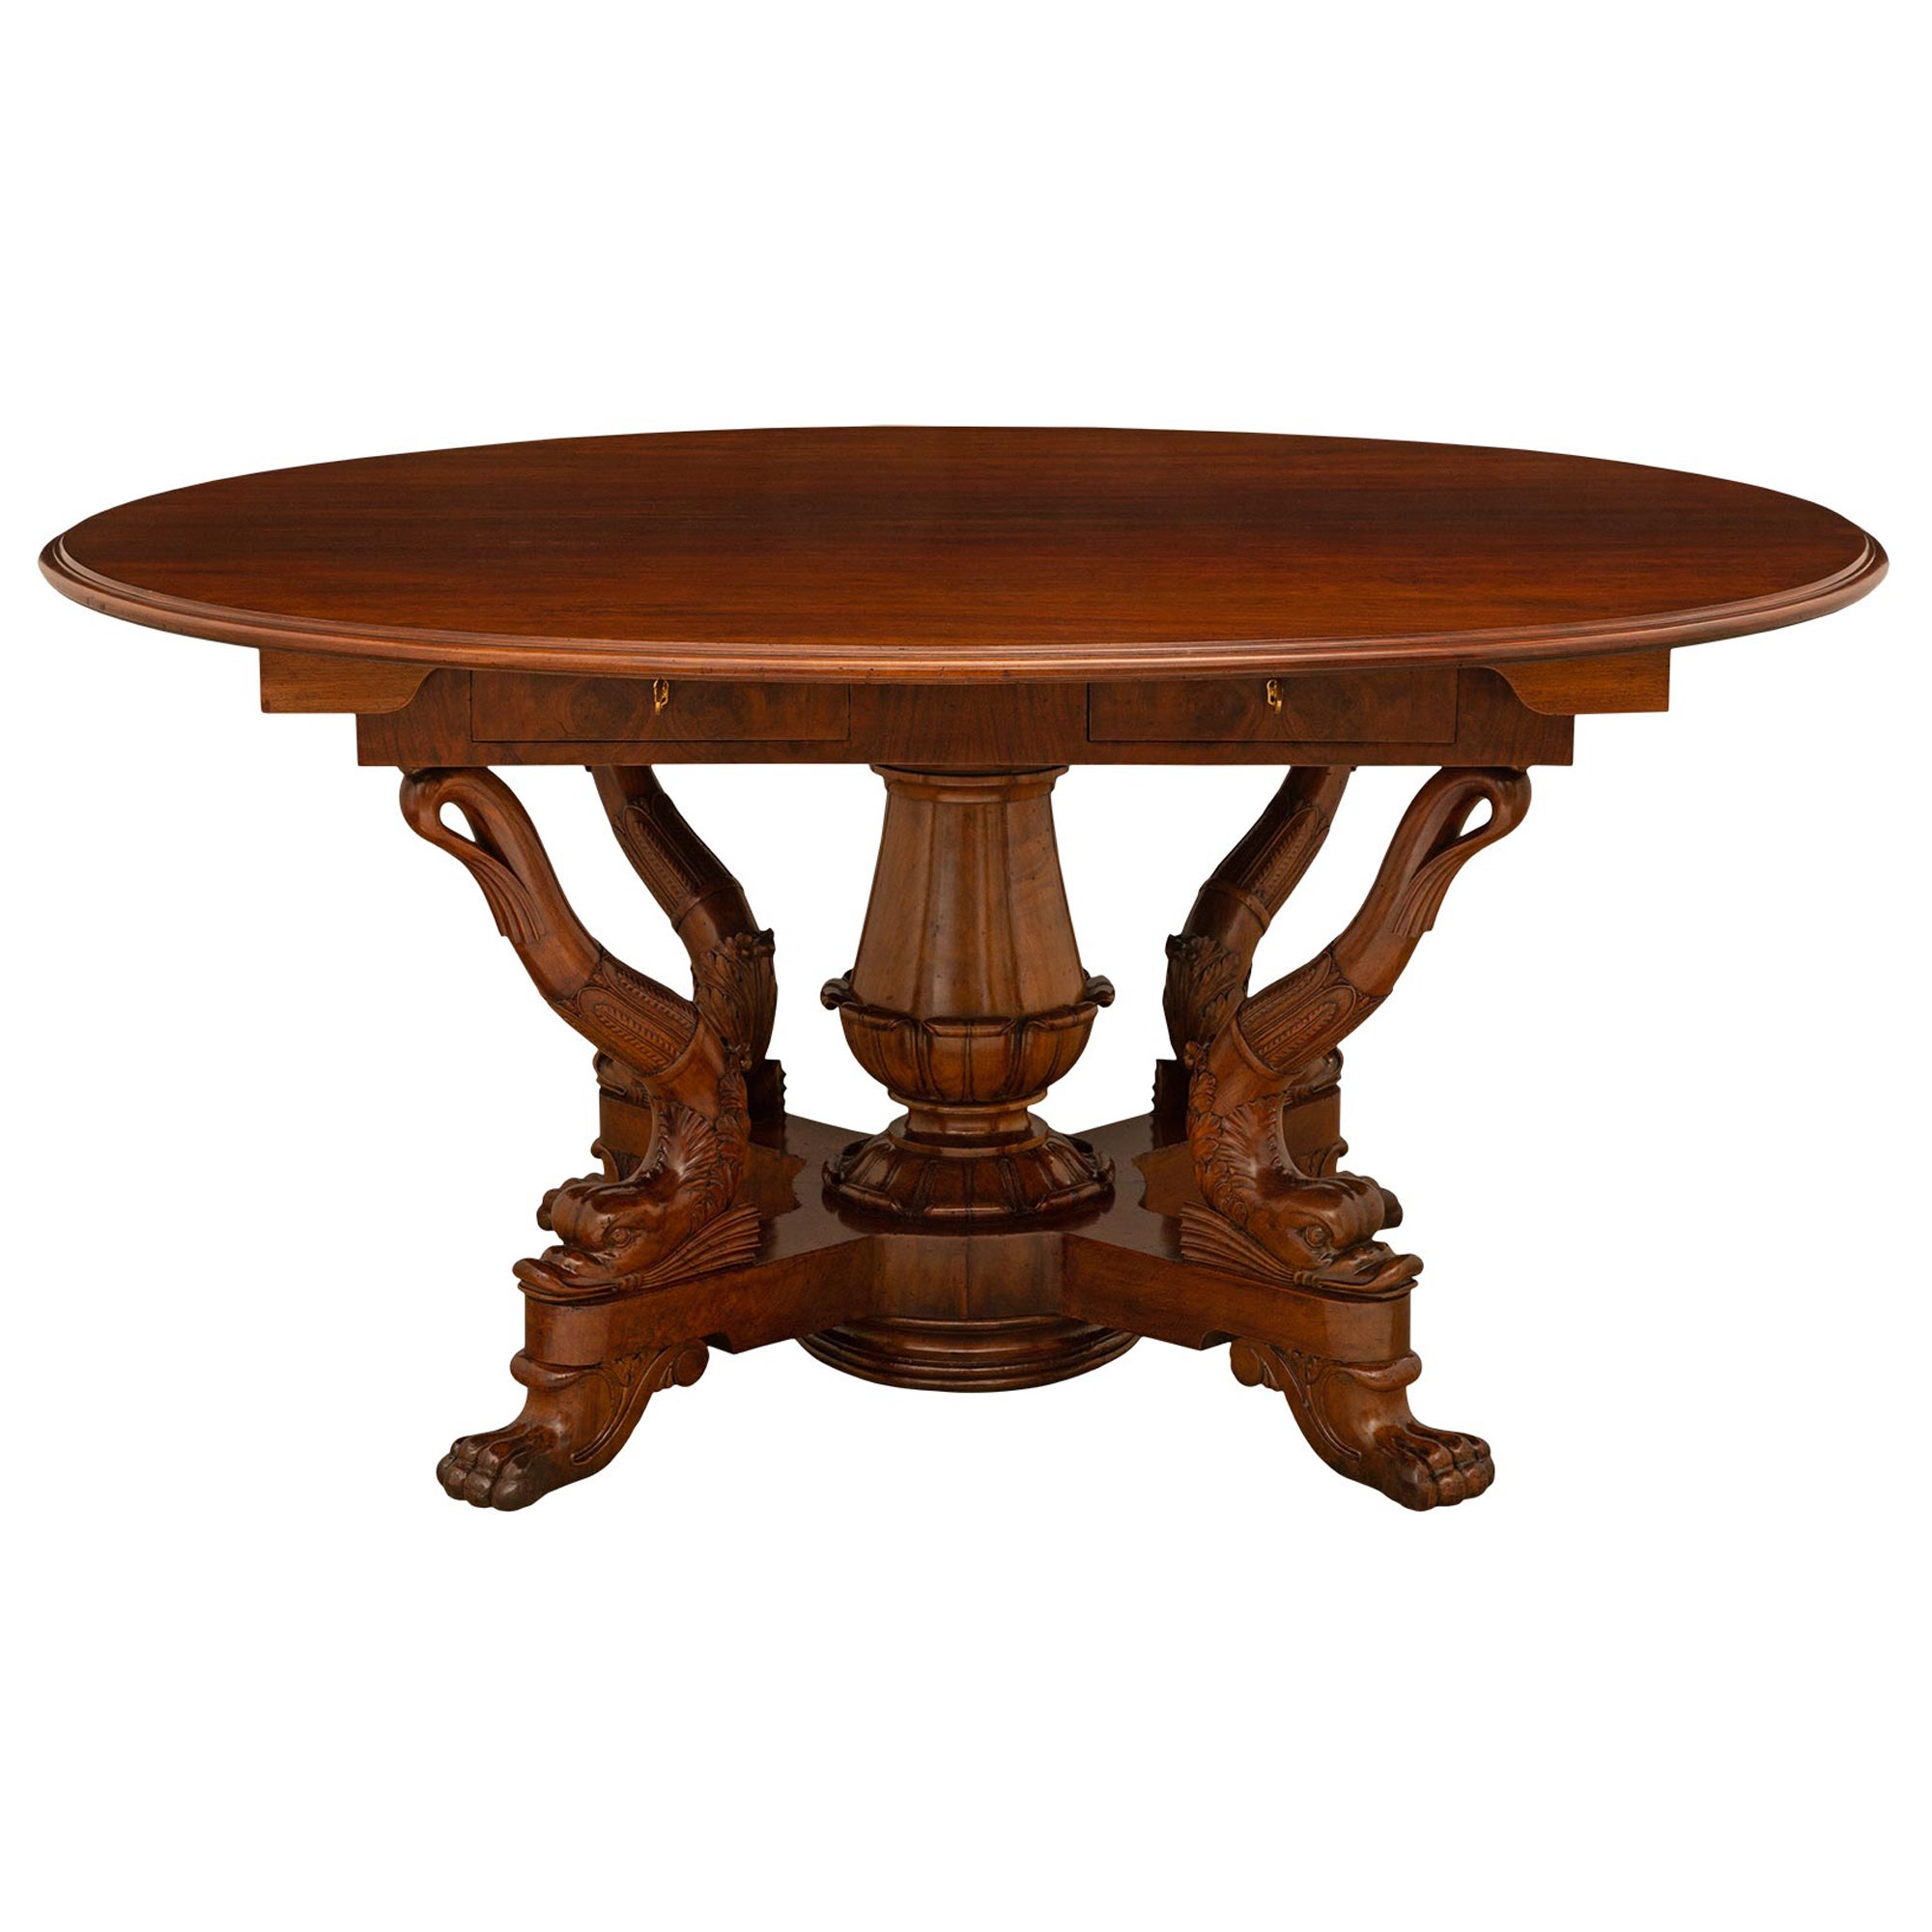 Italian 19th Century Genovese St. Charles X Period Walnut Center/Dining Table For Sale